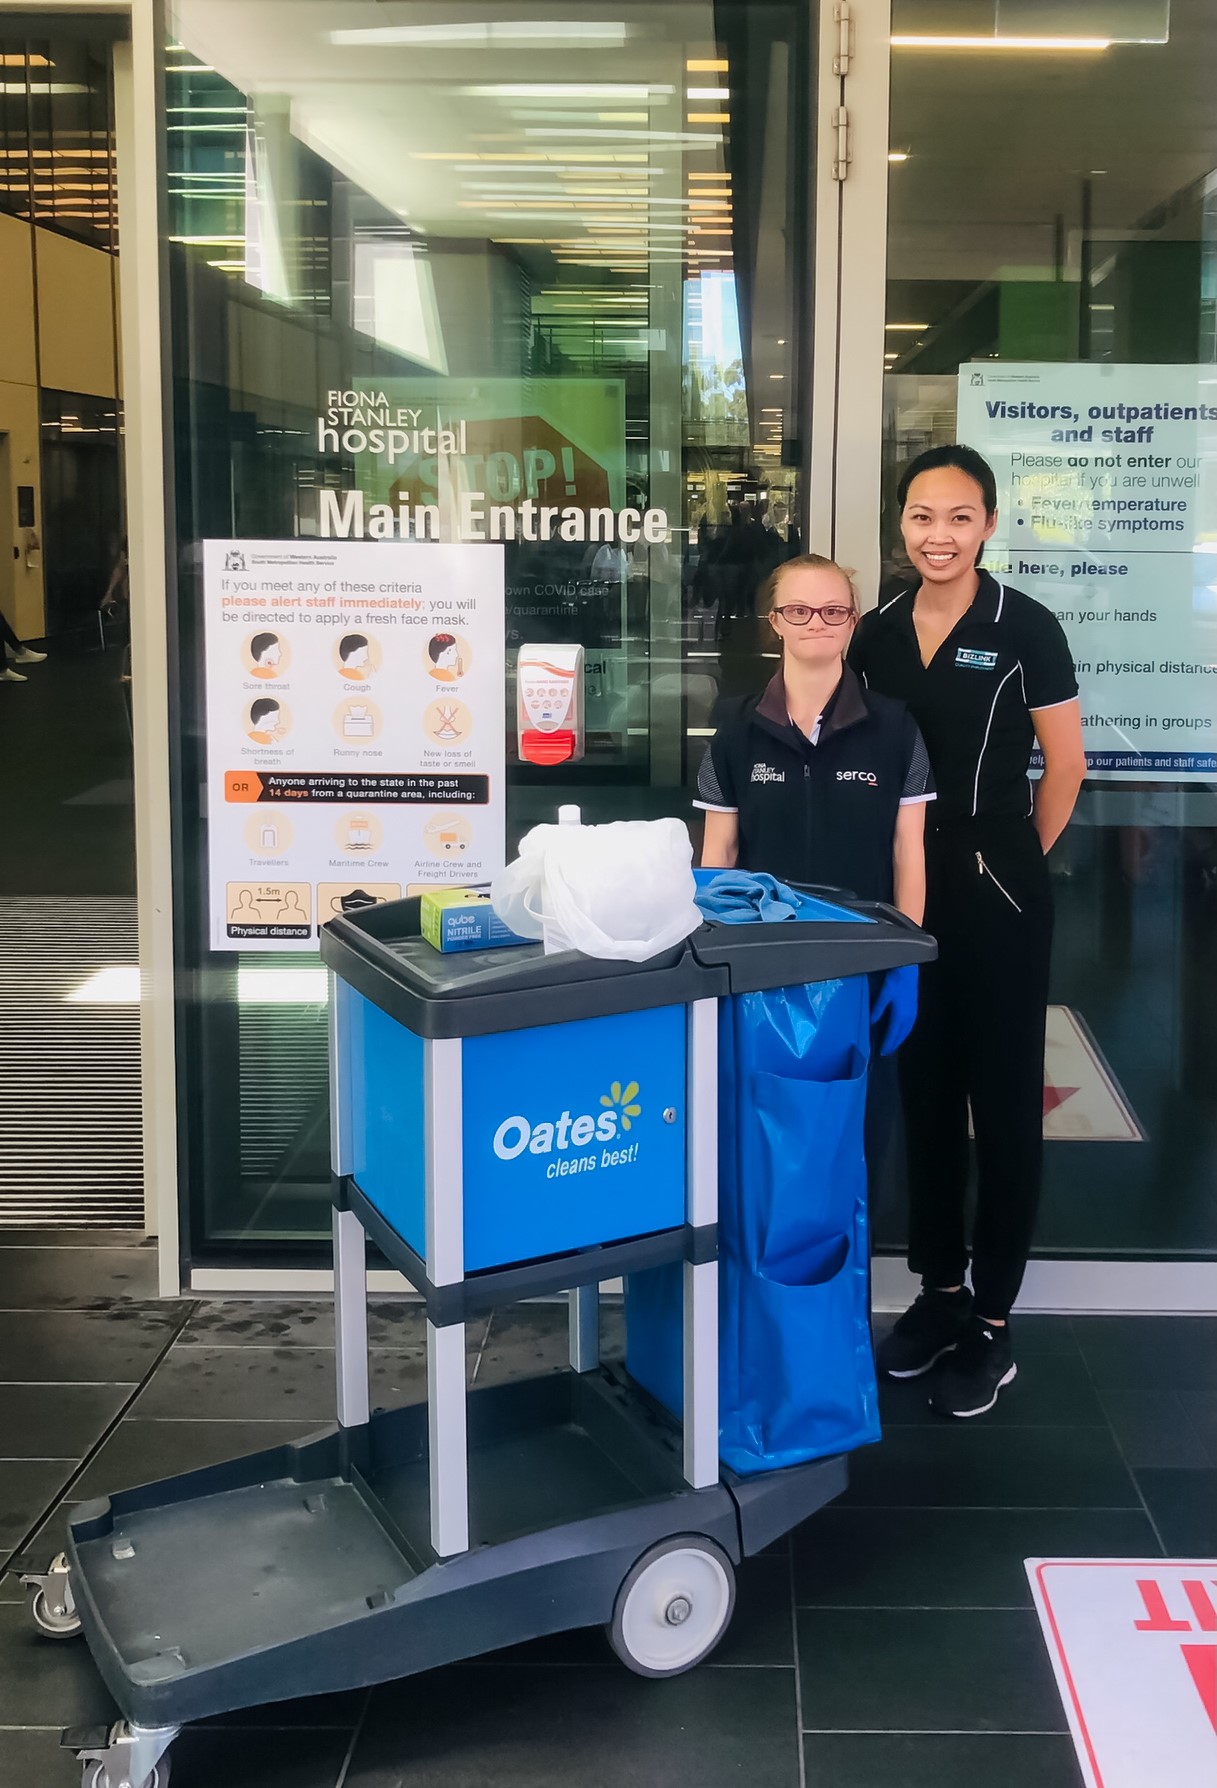 2 girls standing next to each other in front of a cleaning trolley and hospital entrance glass door